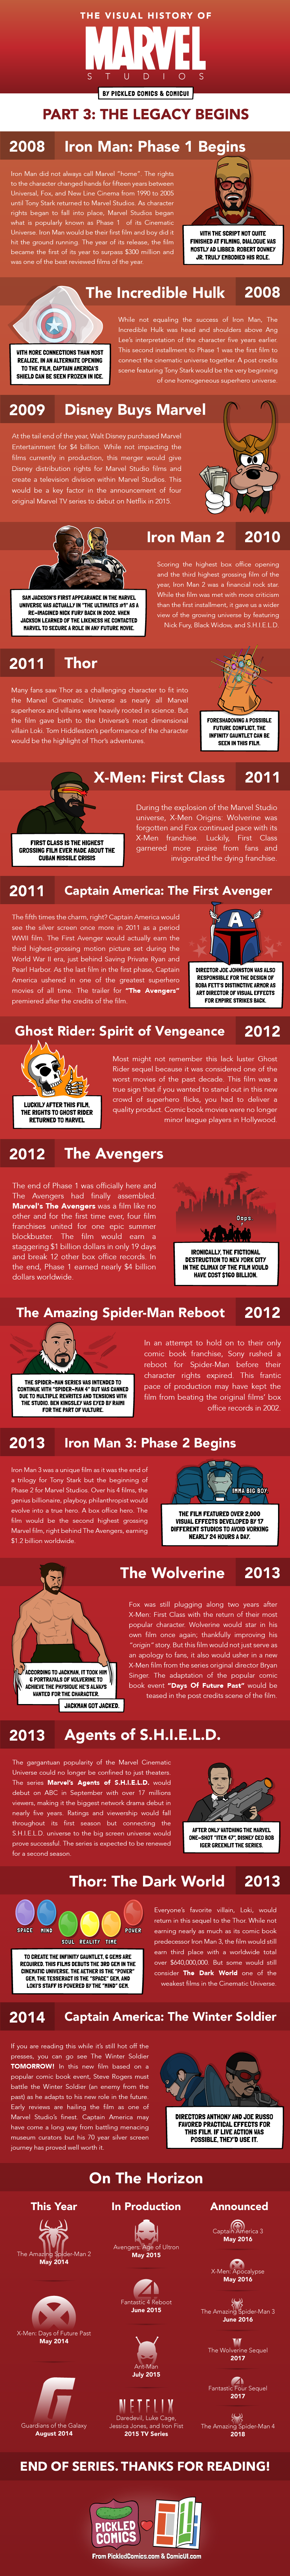 The Visual History Of Marvel Studios. Part 3 starts in 2008 with Phase 1 and Iron Man, and ends in 2014 with the anticipated release of The Winter Solider.